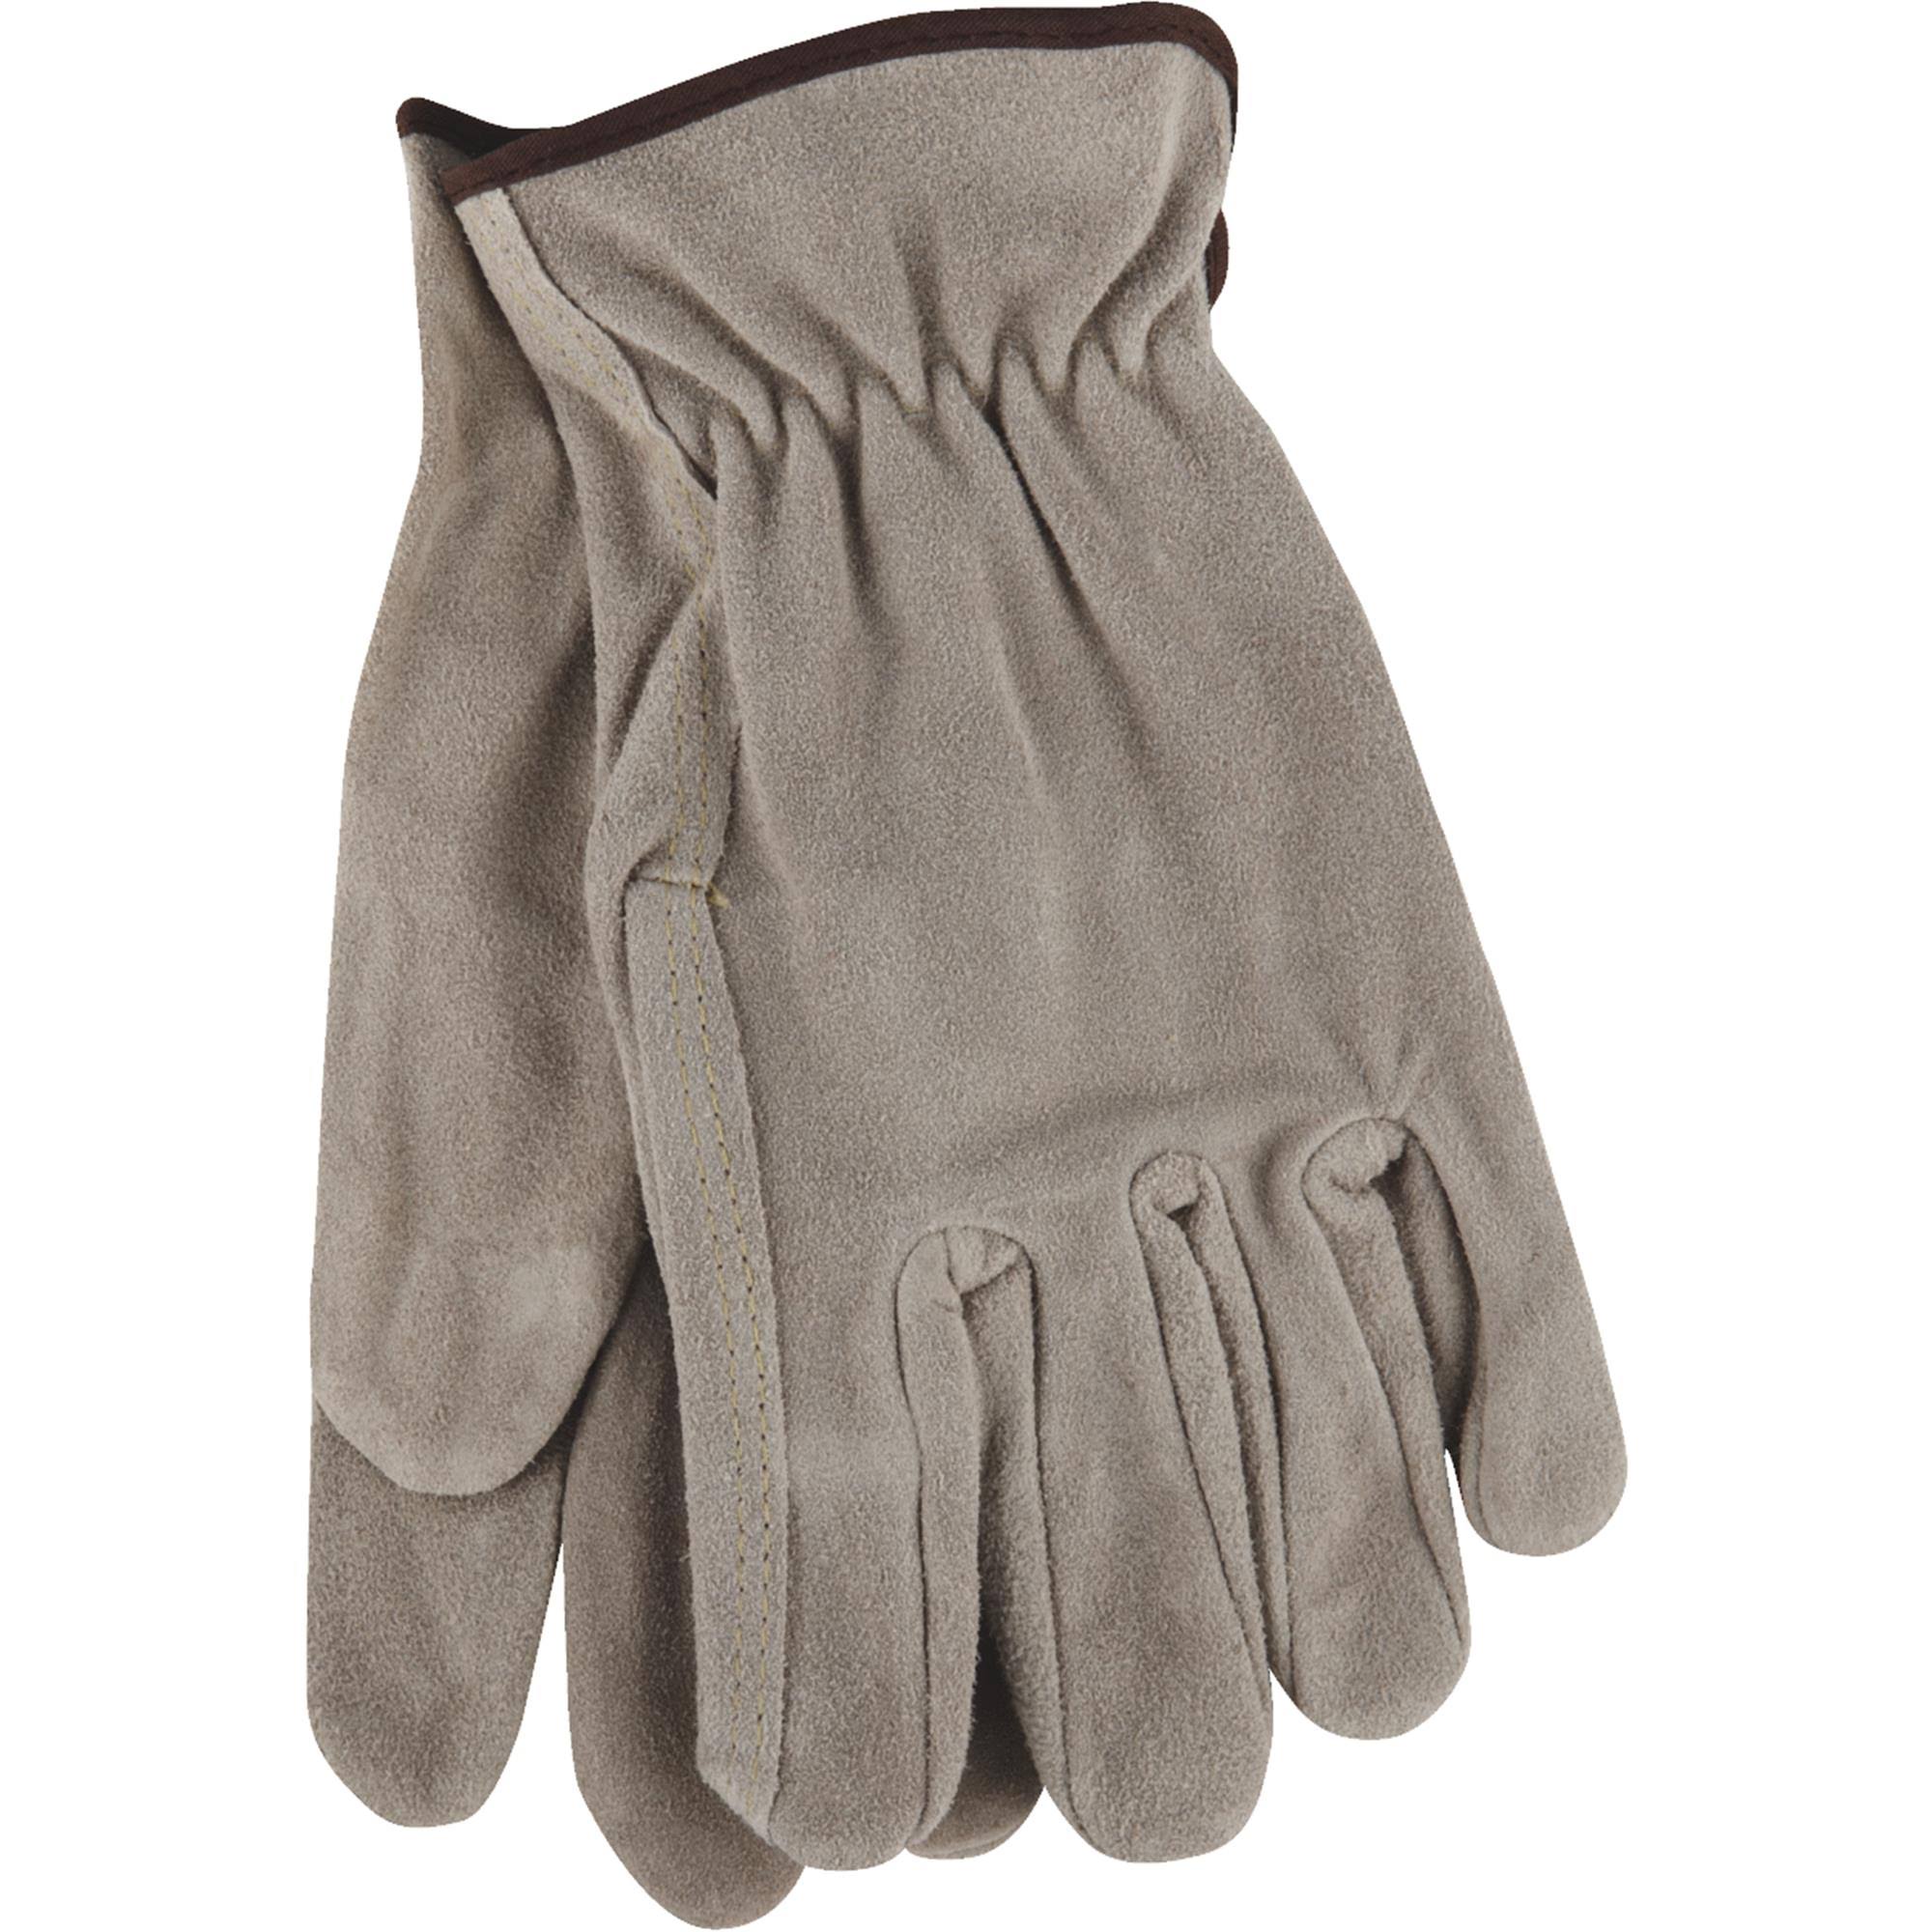 Do it Brushed Suede Leather Work Glove - XLarge